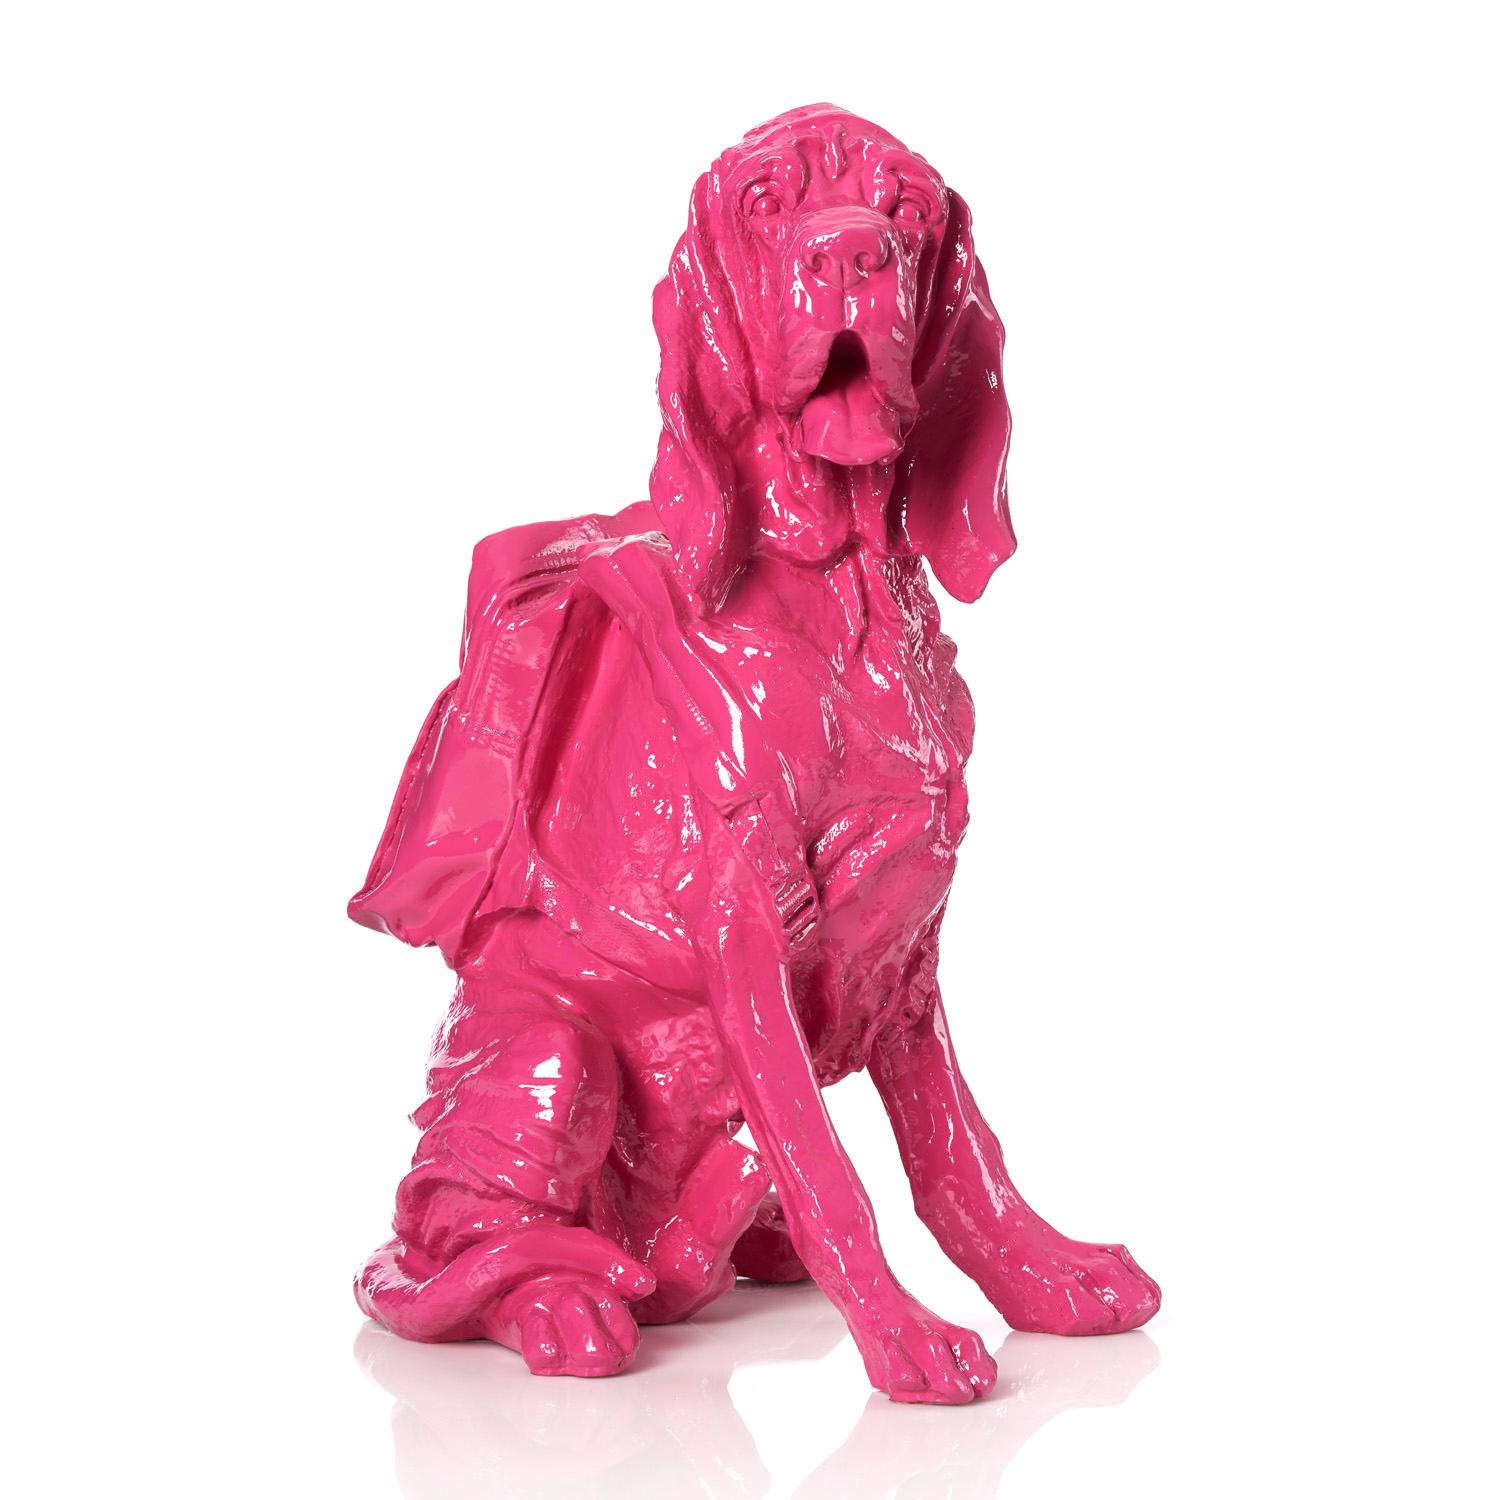 Cloned Bloodhound with Backpack (pink) - Sculpture by William Sweetlove